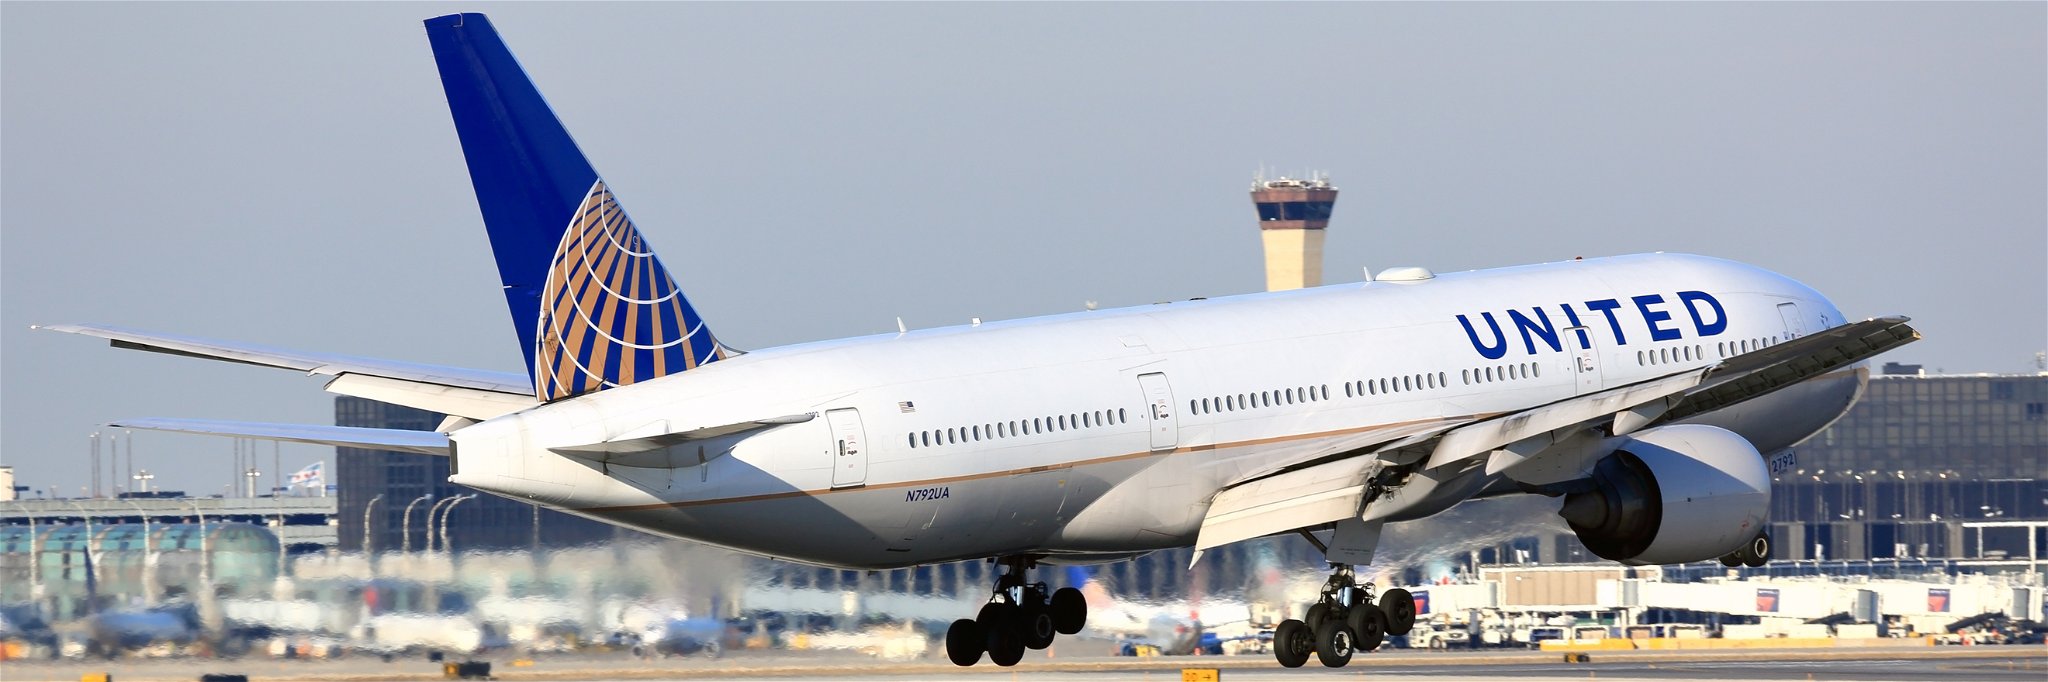 United Airlines will be touching down in more international destinations in 2023.